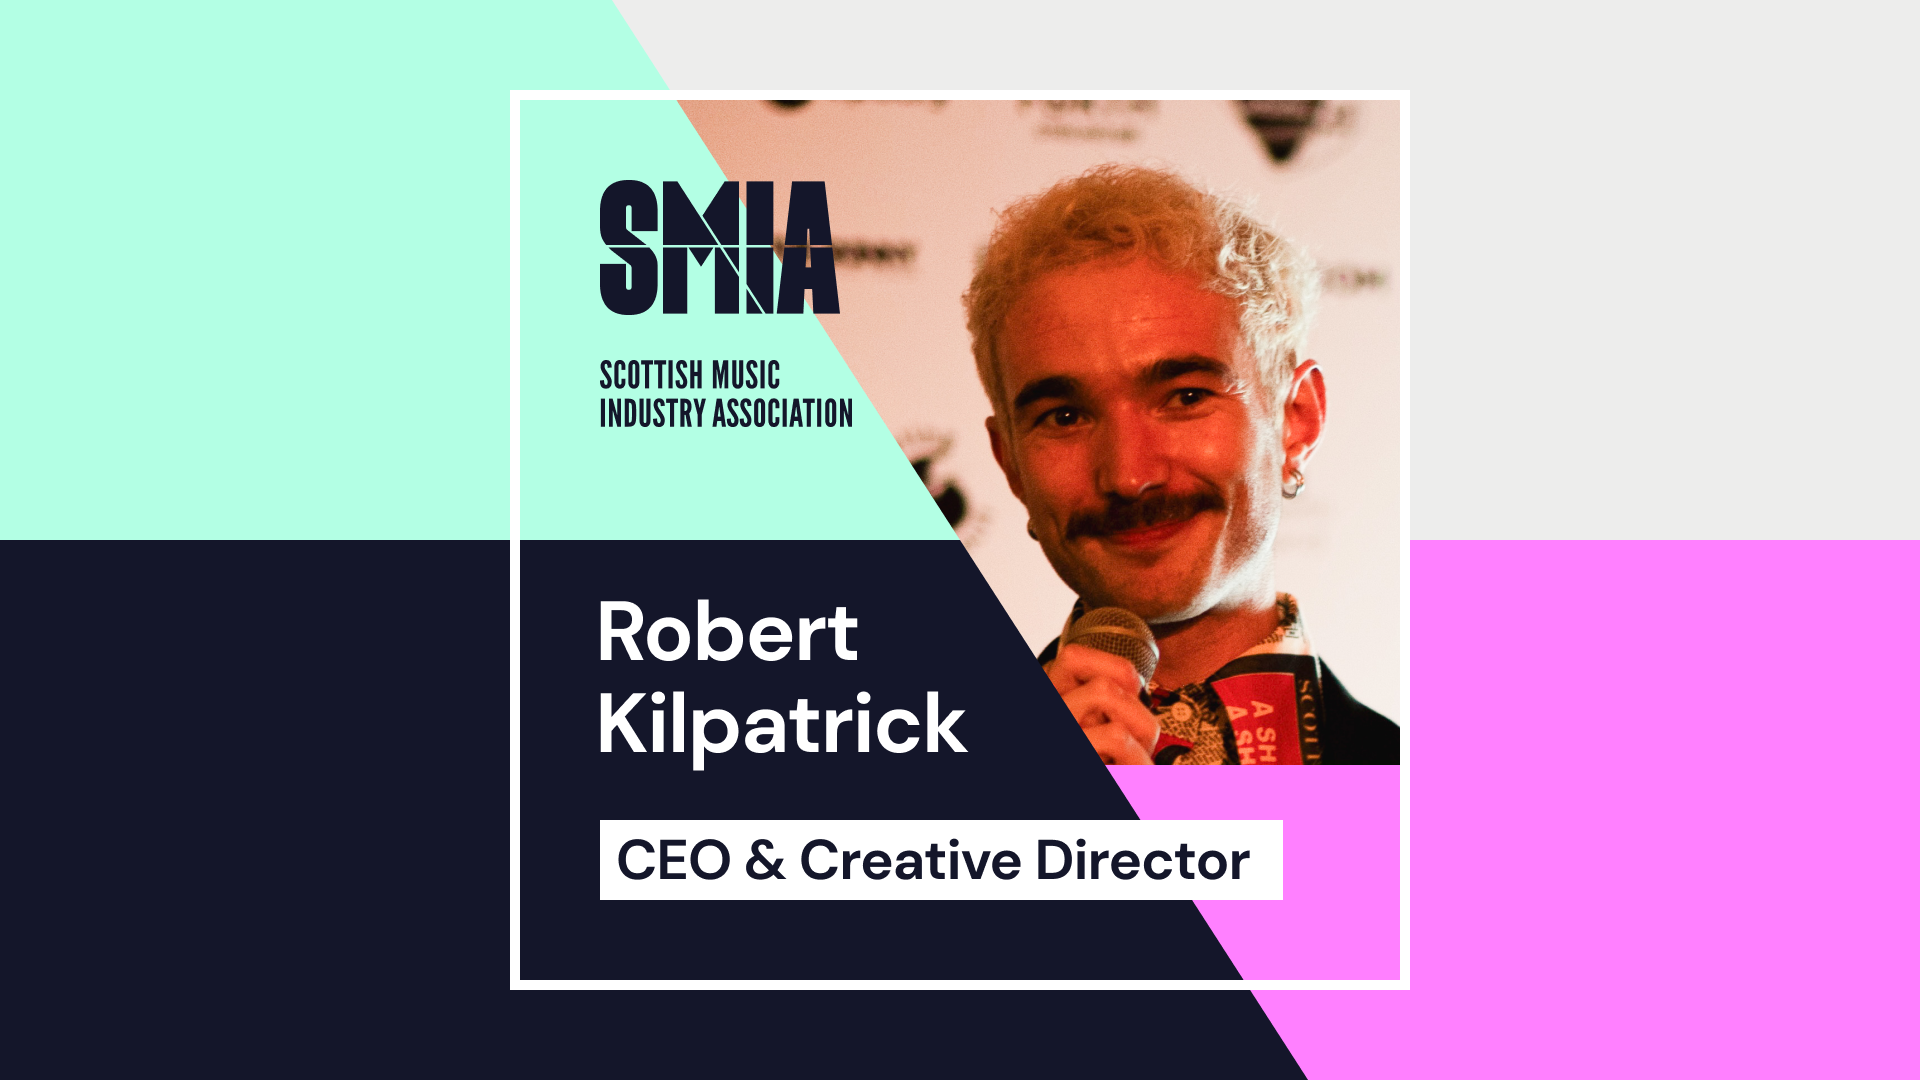 An End Of Year Member Message From Robert Kilpatrick; CEO and Creative Director